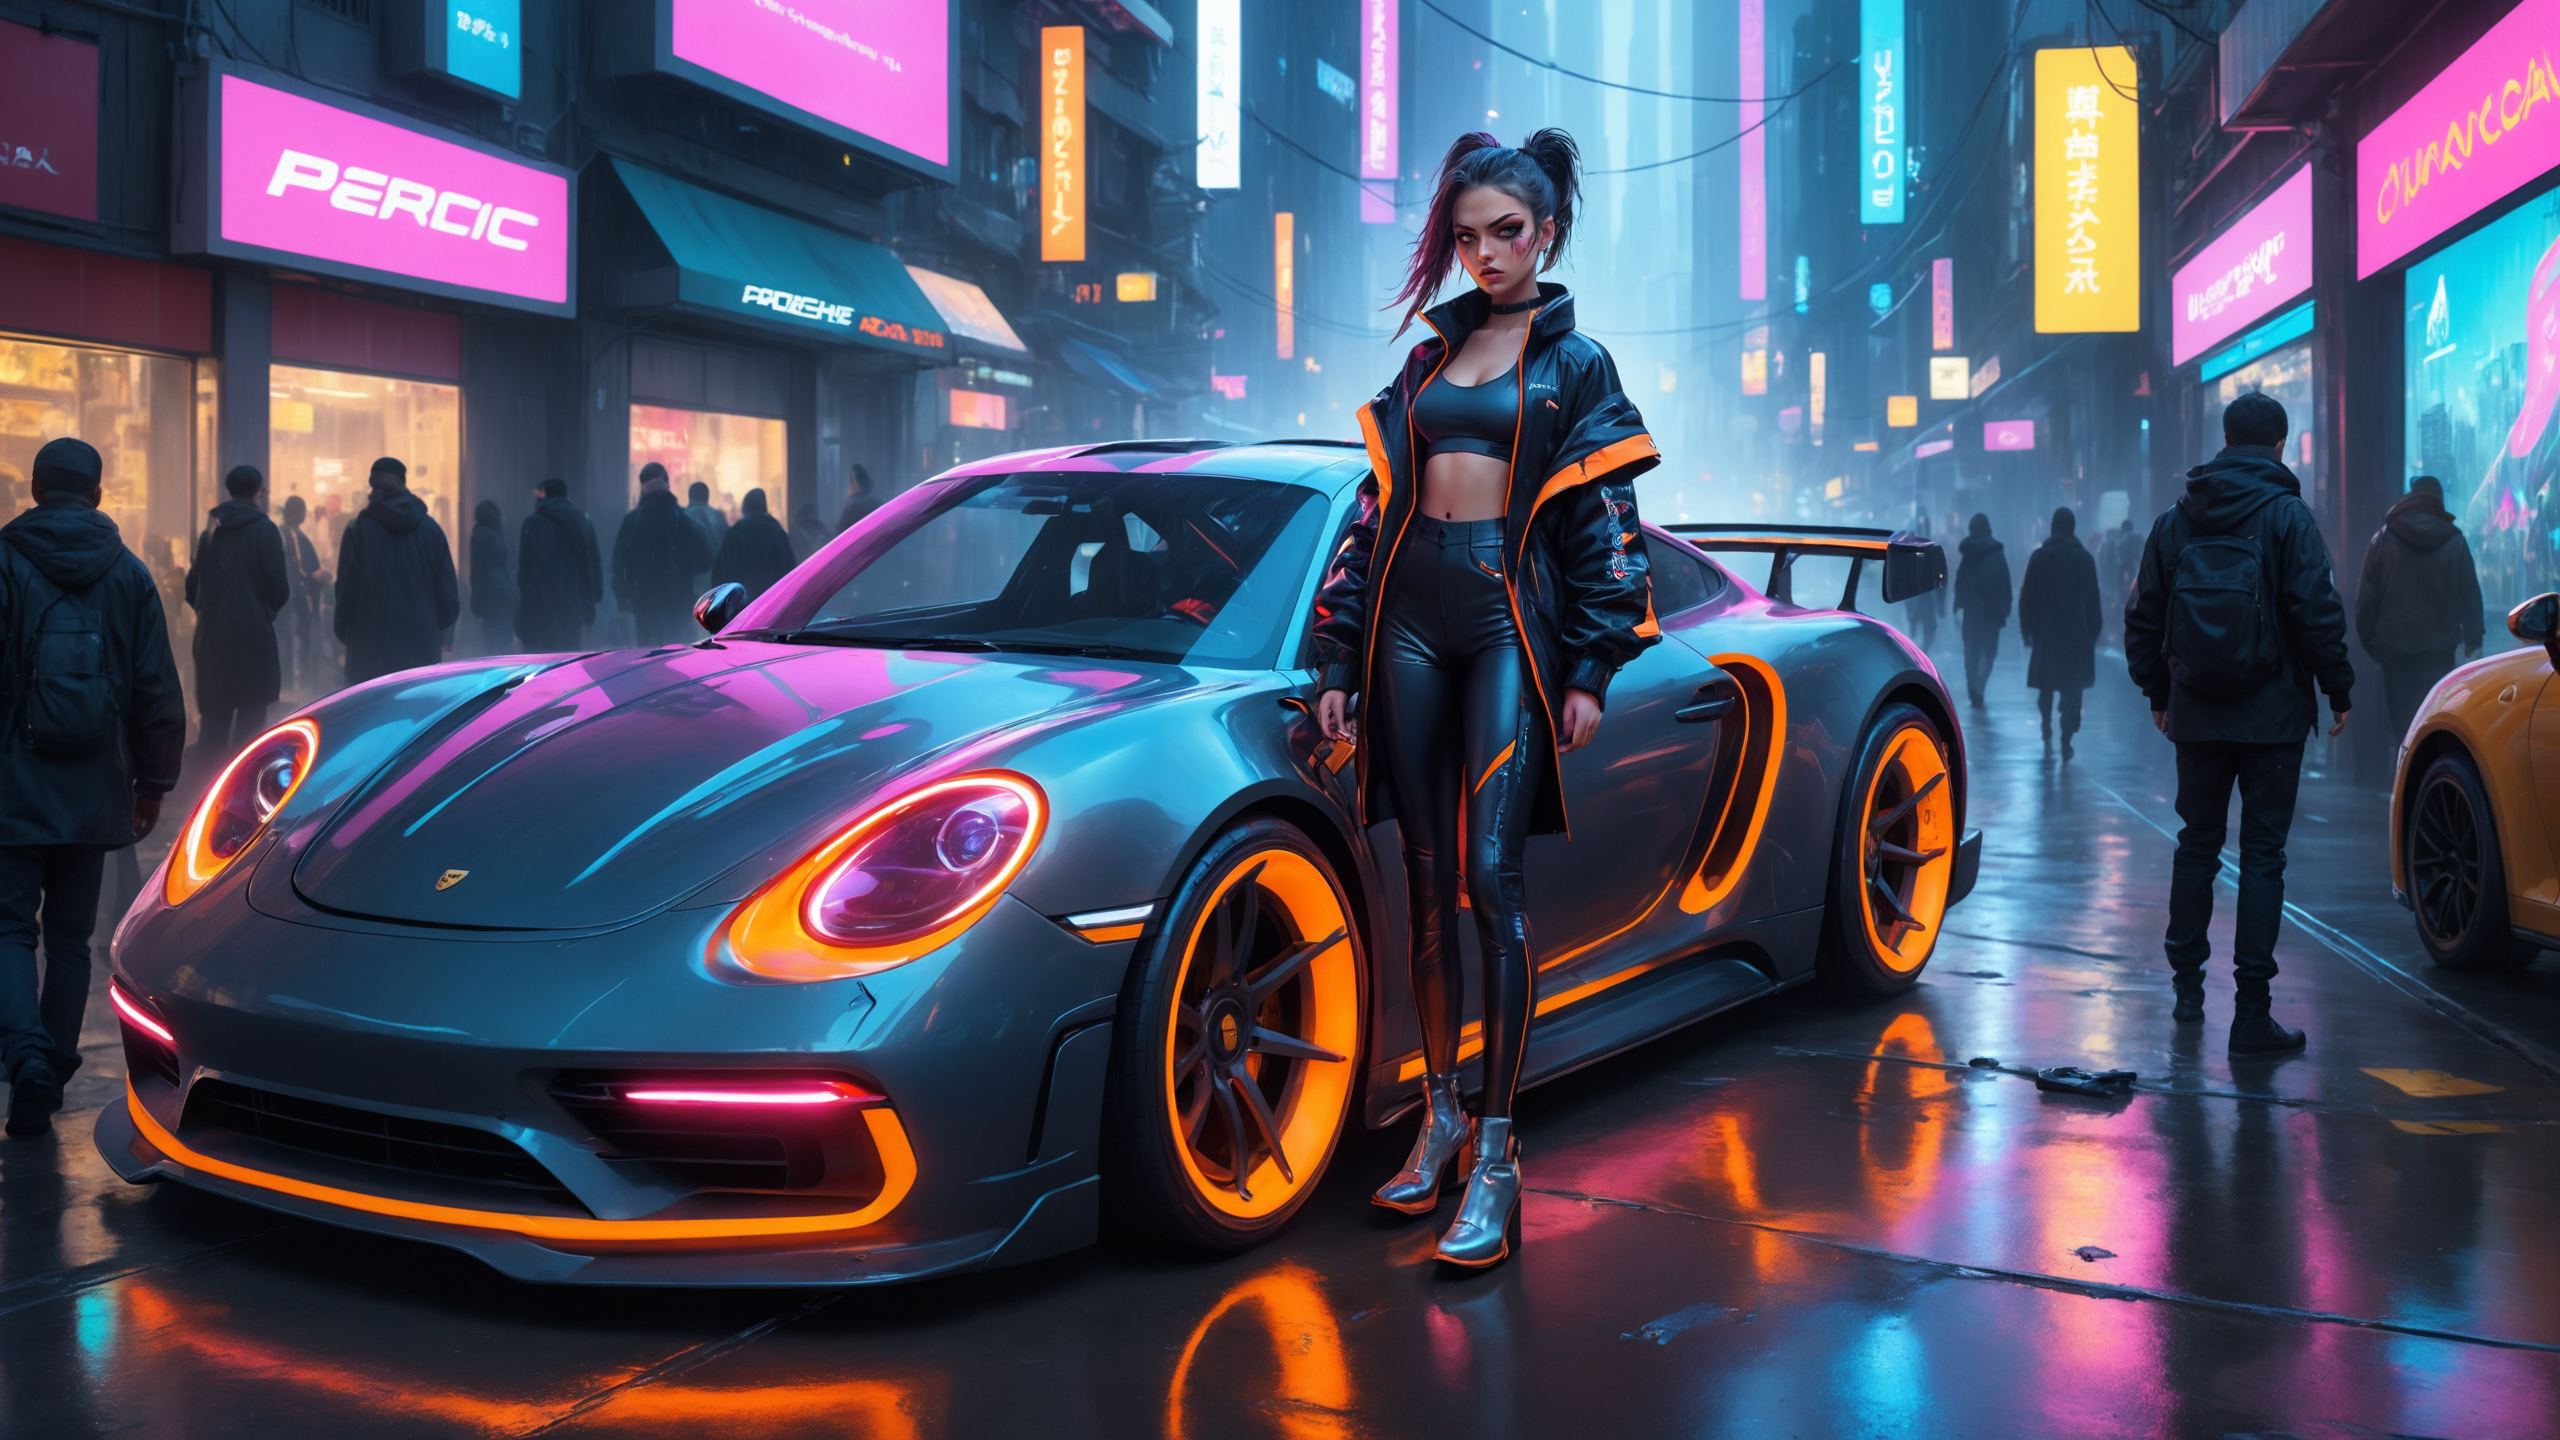 General 2560x1440 AI art Porsche neon women rain city night reflection car leather jacket orange cars digital art standing looking at viewer vehicle frontal view parted lips headlights tank top jacket belly sign building